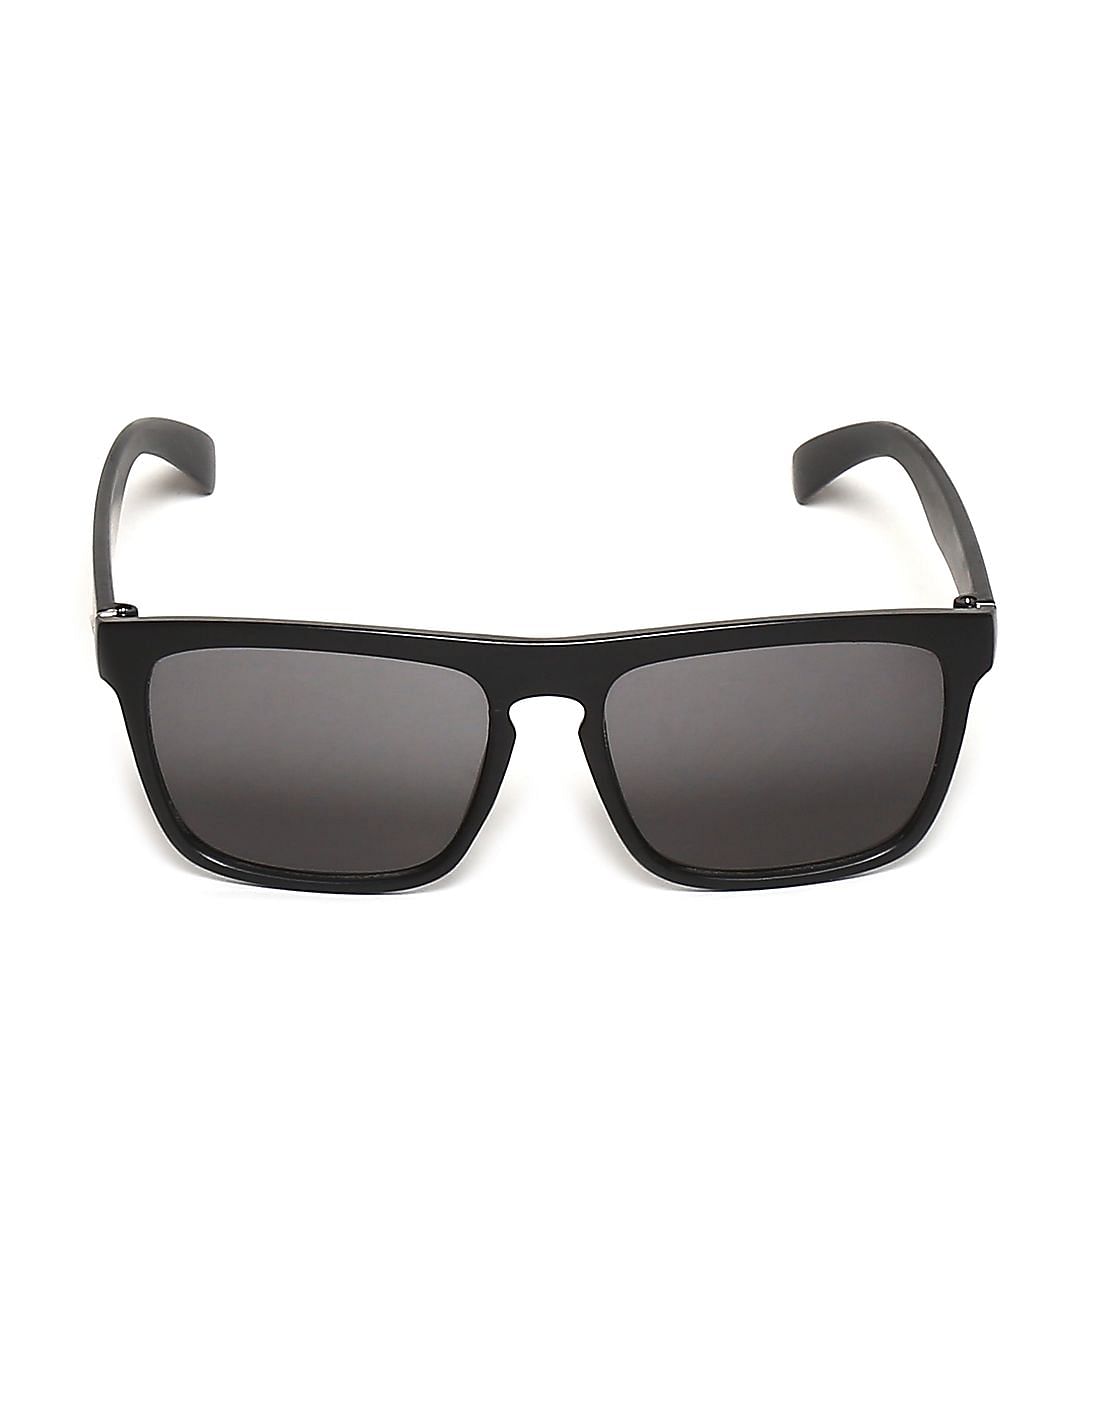 70% Off on Unlimited Black Boys Rectangular Frame Sunglasses Starts from Rs. 60